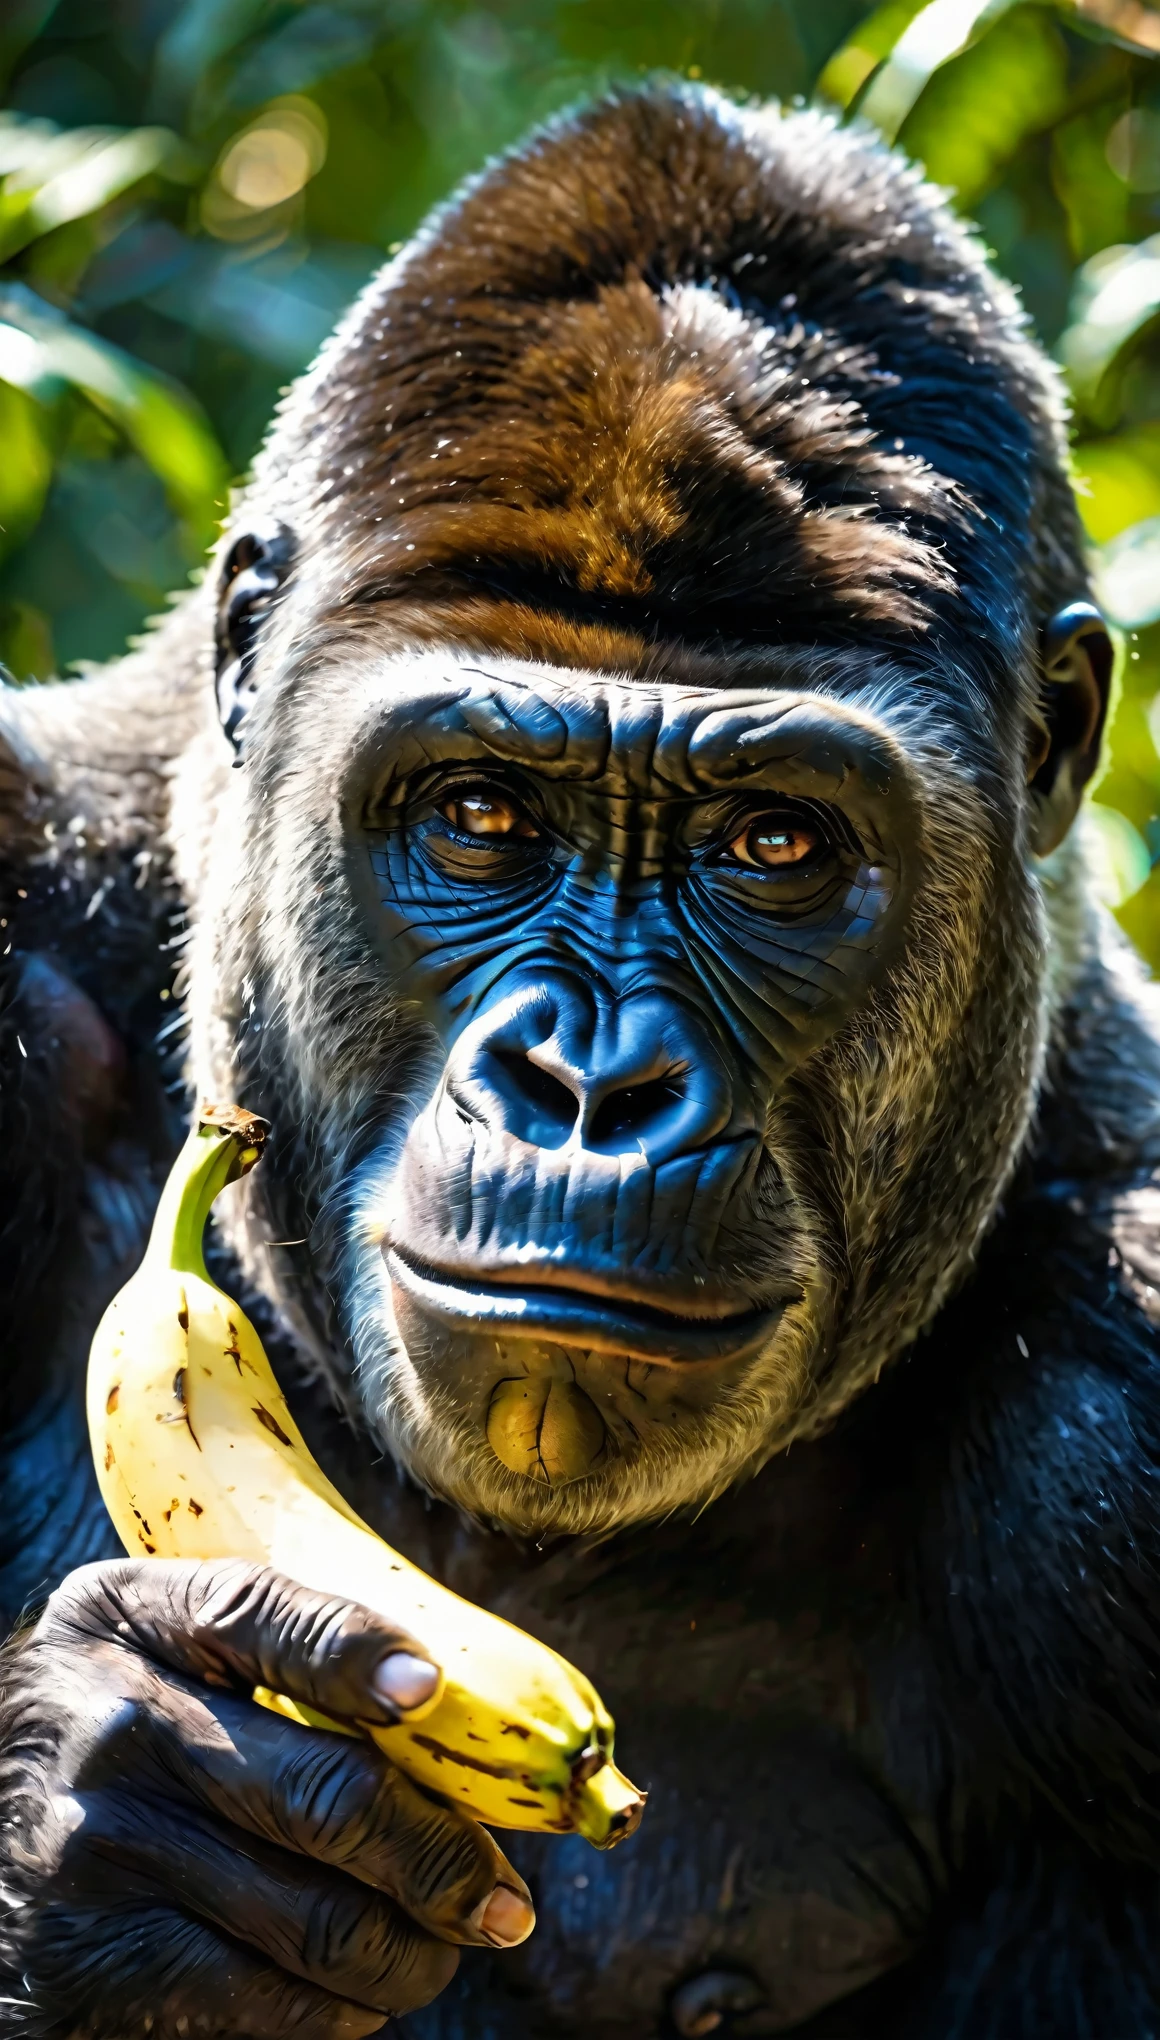 (best quality,highres,ultra-detailed),medium close-up of an African gorilla's,[bored](bored:0.9) expression, [holding](holding:1.1) a banana in one hand, [watching](watching:1.1) an animal photographer with curiosity, [realistic](realistic:1.37) facial features and texture, [intense](intense:1.1) gaze from the gorilla's eyes, [sunlight](sunlight:1.1) casting [dramatic](dramatic:1.1) shadows, [vivid](vivid:1.1) colors highlighting the gorilla's fur, [bokeh](bokeh:1.1) background adding depth to the image, [natural](natural:1.1) lighting capturing the raw beauty of the moment, [details](details:1.1) of the gorilla's facial expressions and [muscular](muscular:1.1) physique.